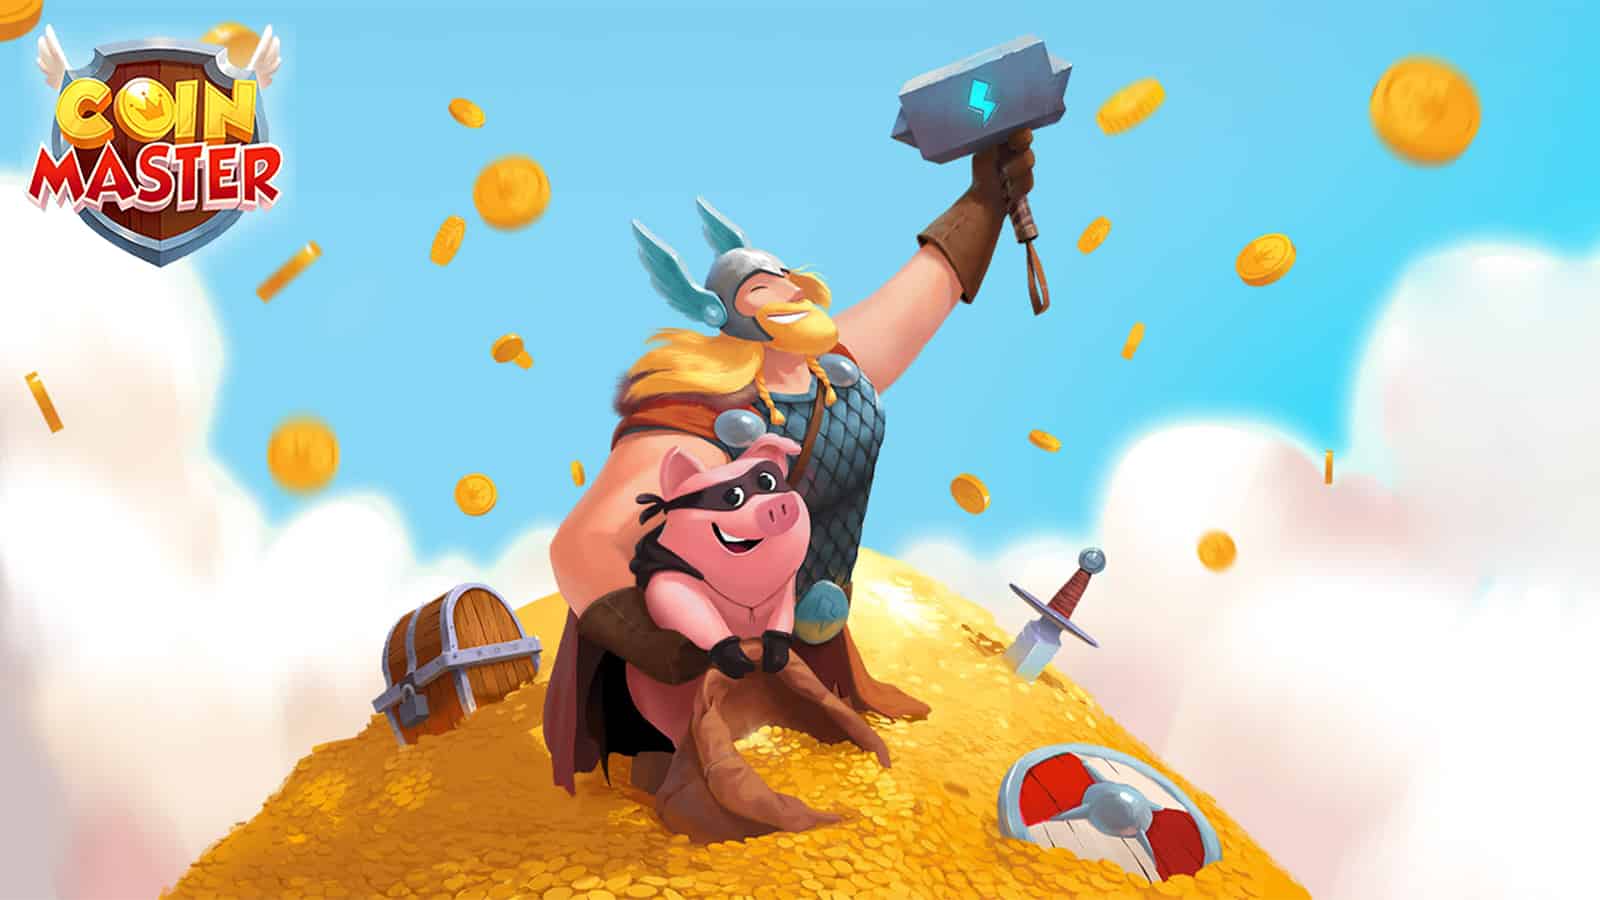 Coin Master free spins - updated daily links (February ) | Pocket Gamer